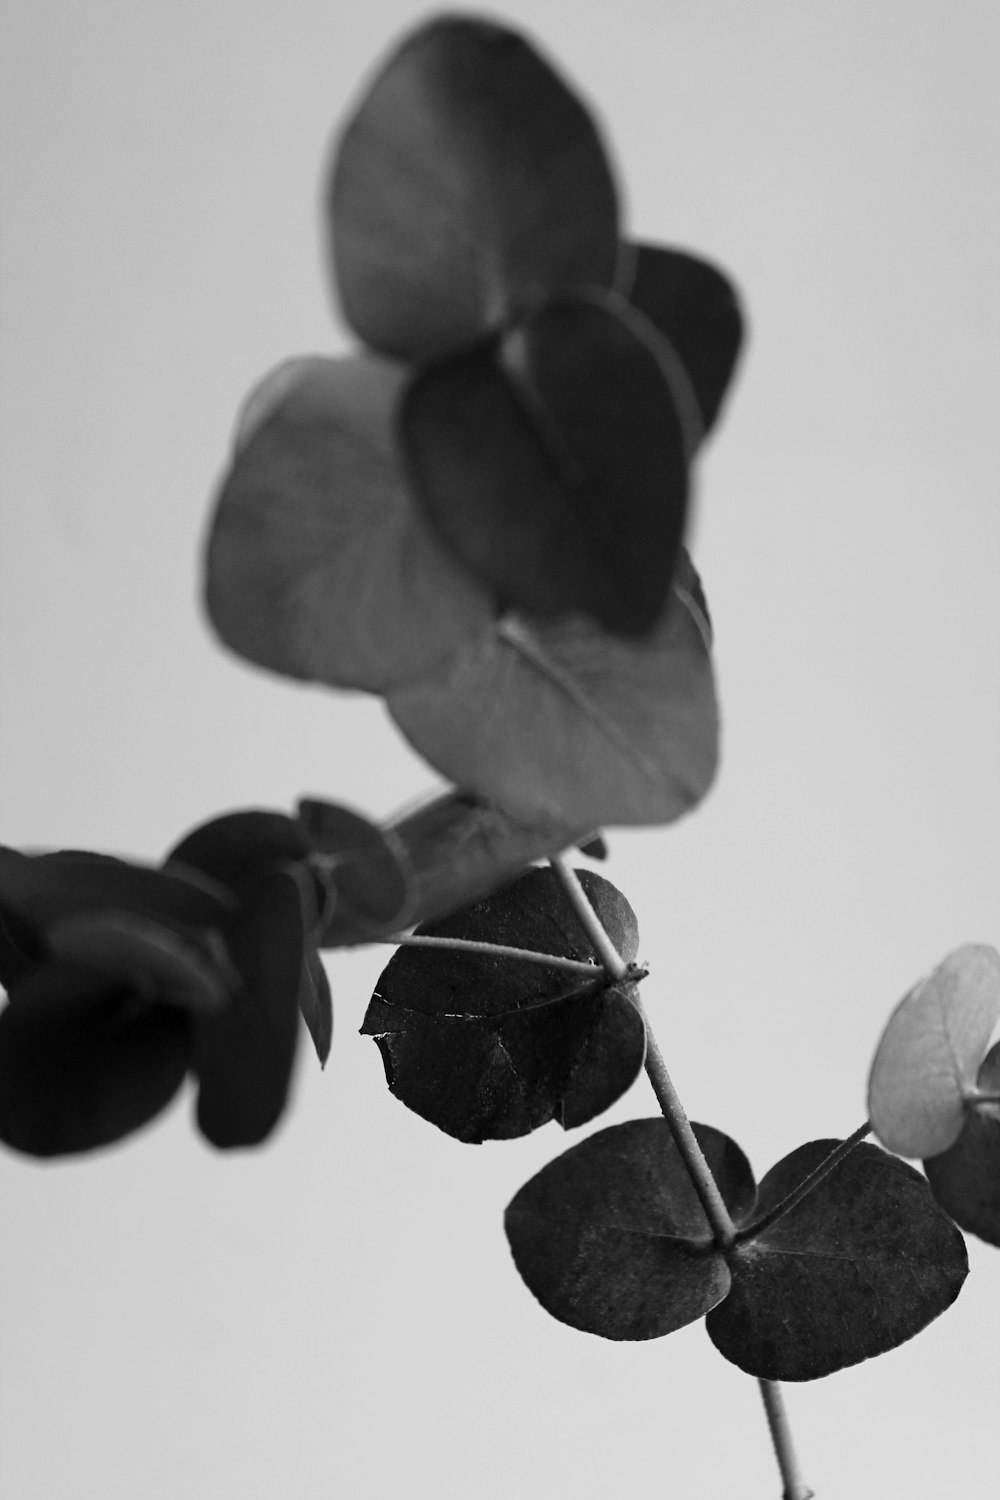 grayscale photo of leaves with water droplets